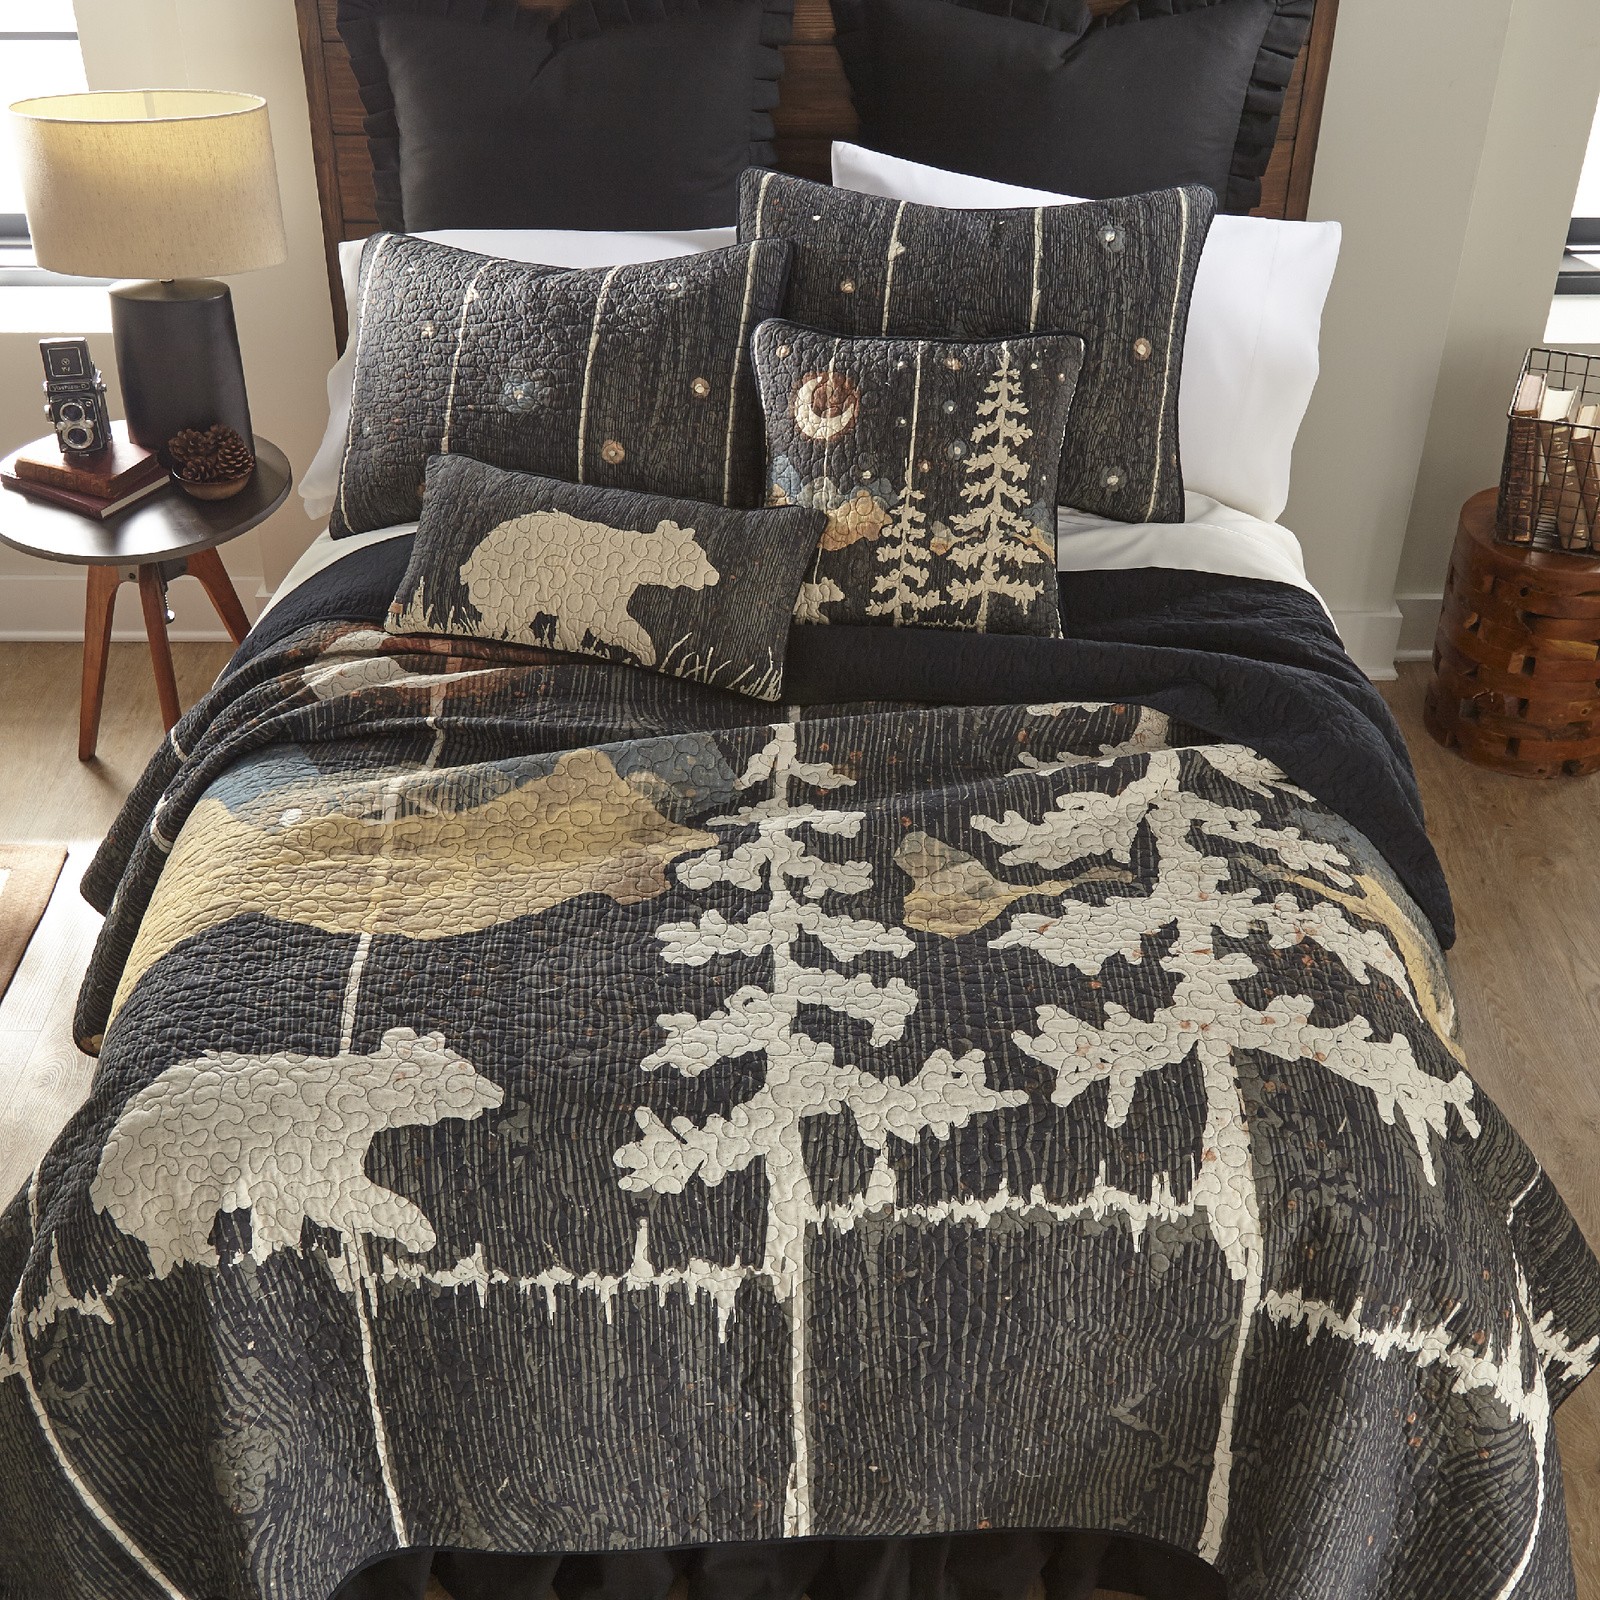 Details about   Donna Sharp Moonlit Cabin Quilted Rustic Country Lodge ** TWIN ** Bedding New 